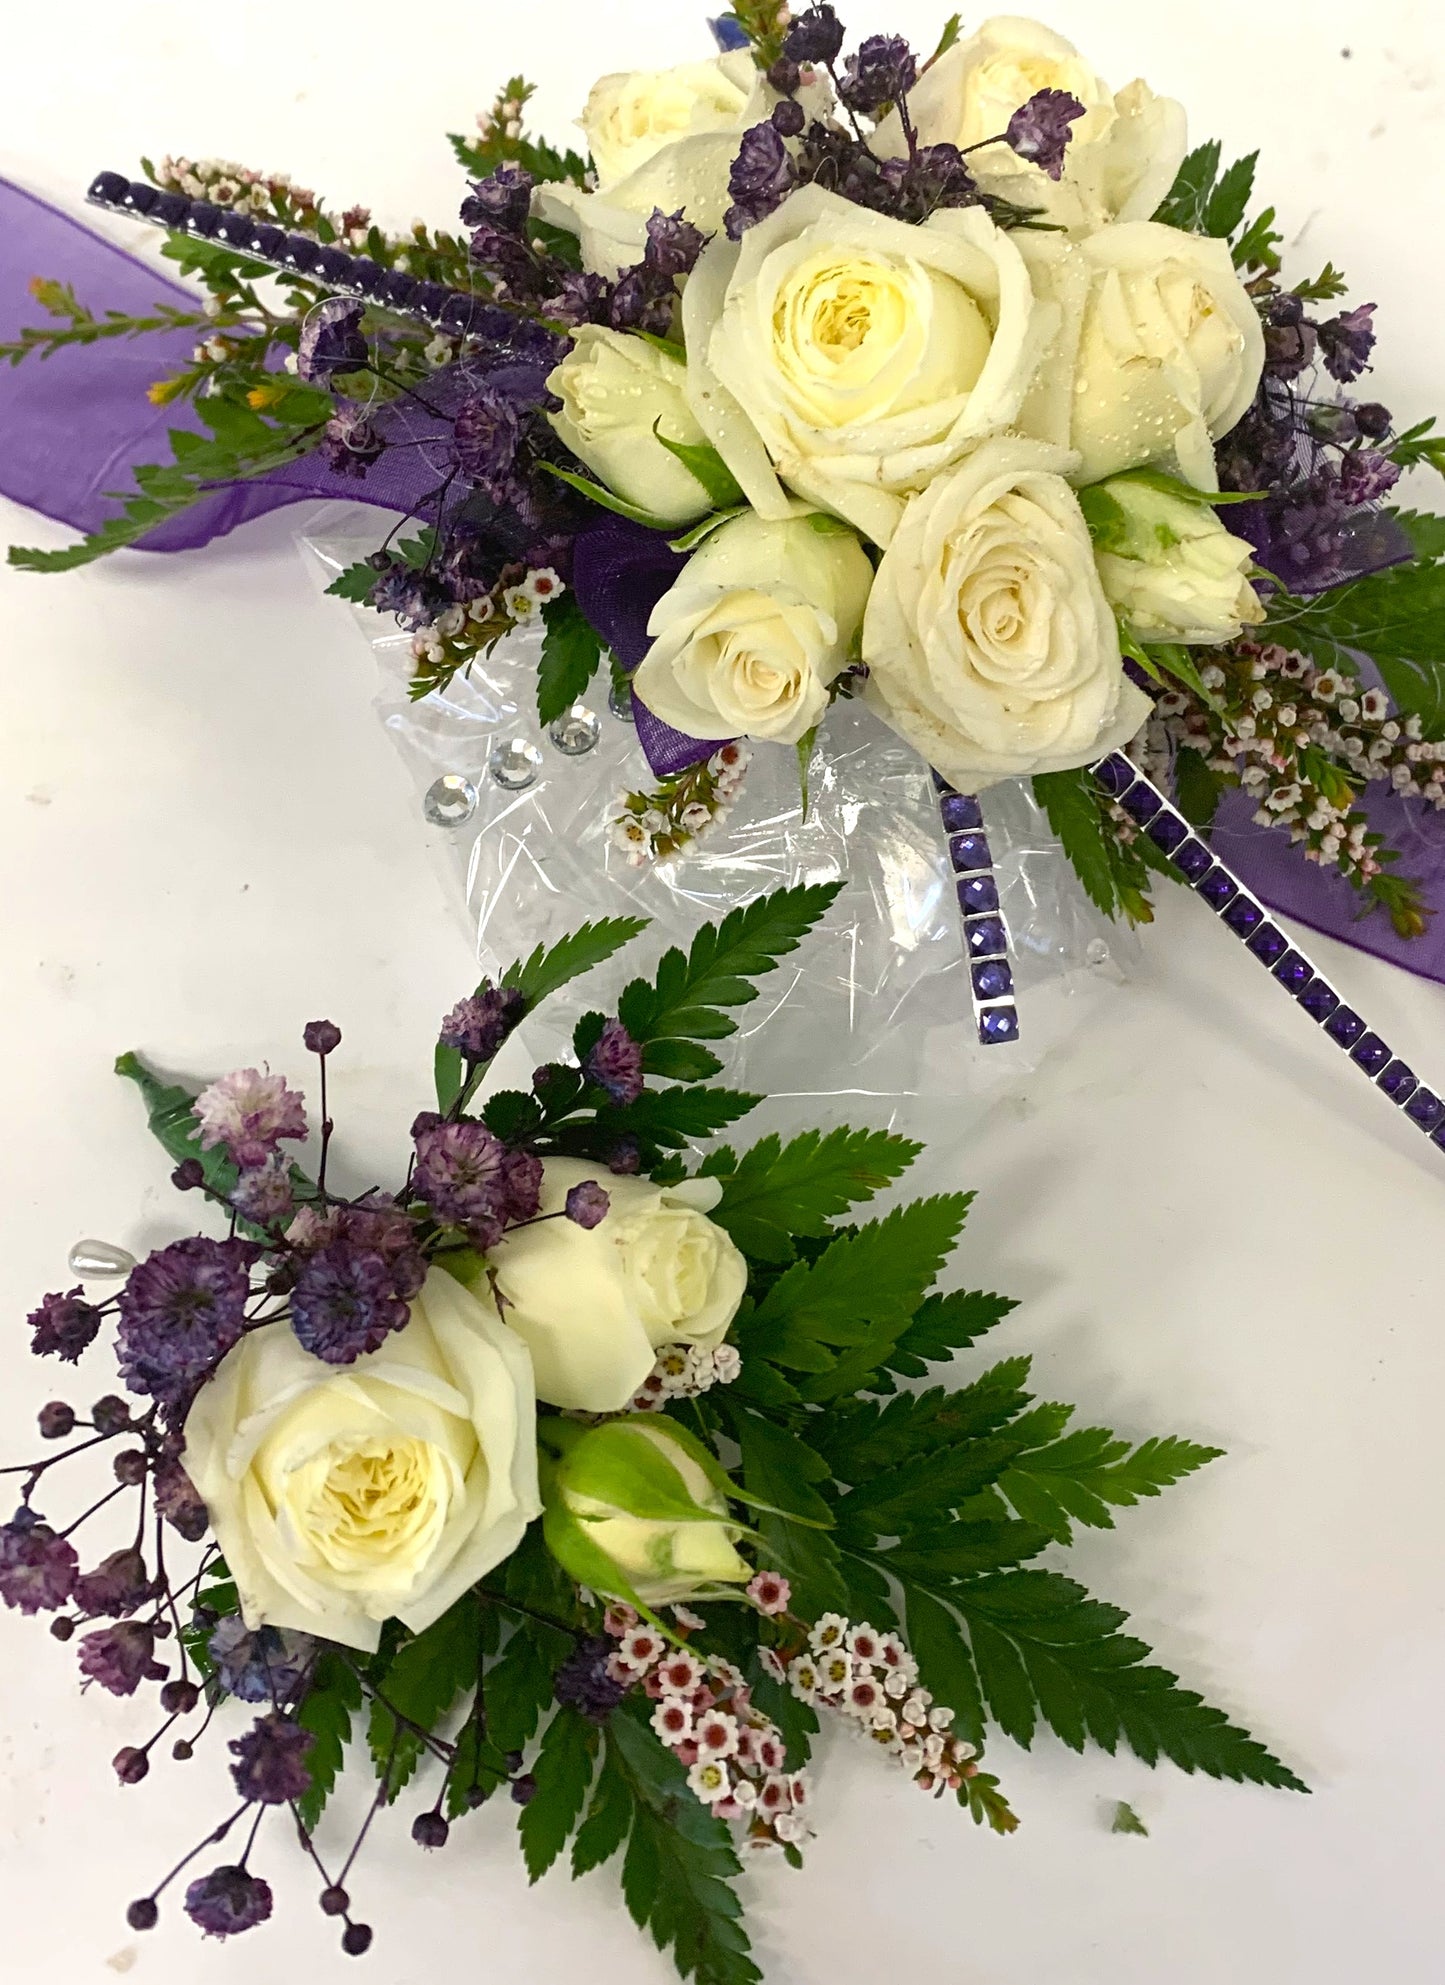 Mini White Rose Corsage with hints of Purple